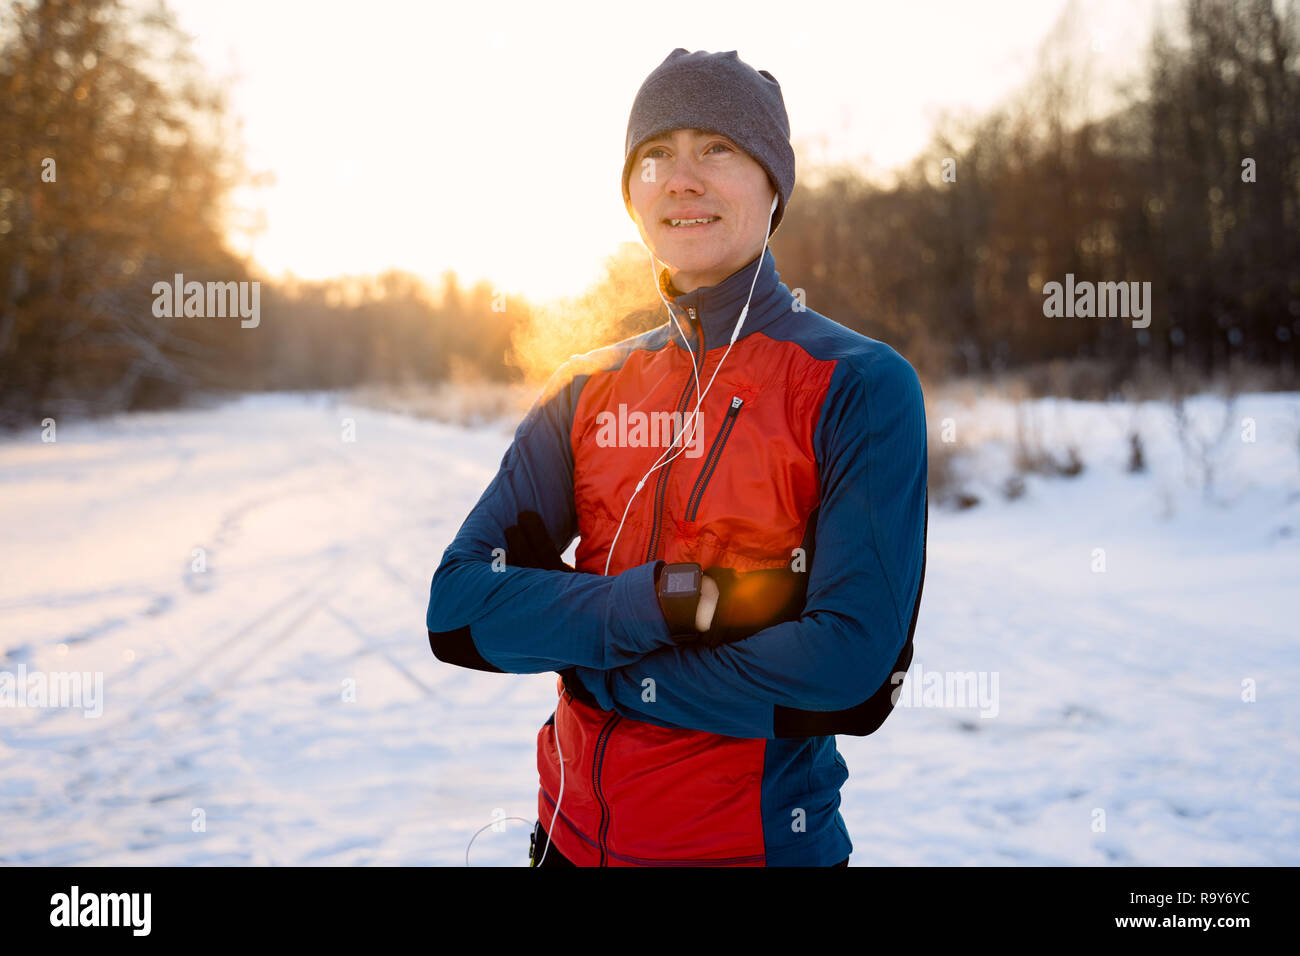 Portrait of a runner dressed in warm sportswear awaiting the start of winter outdoor training. Stock Photo